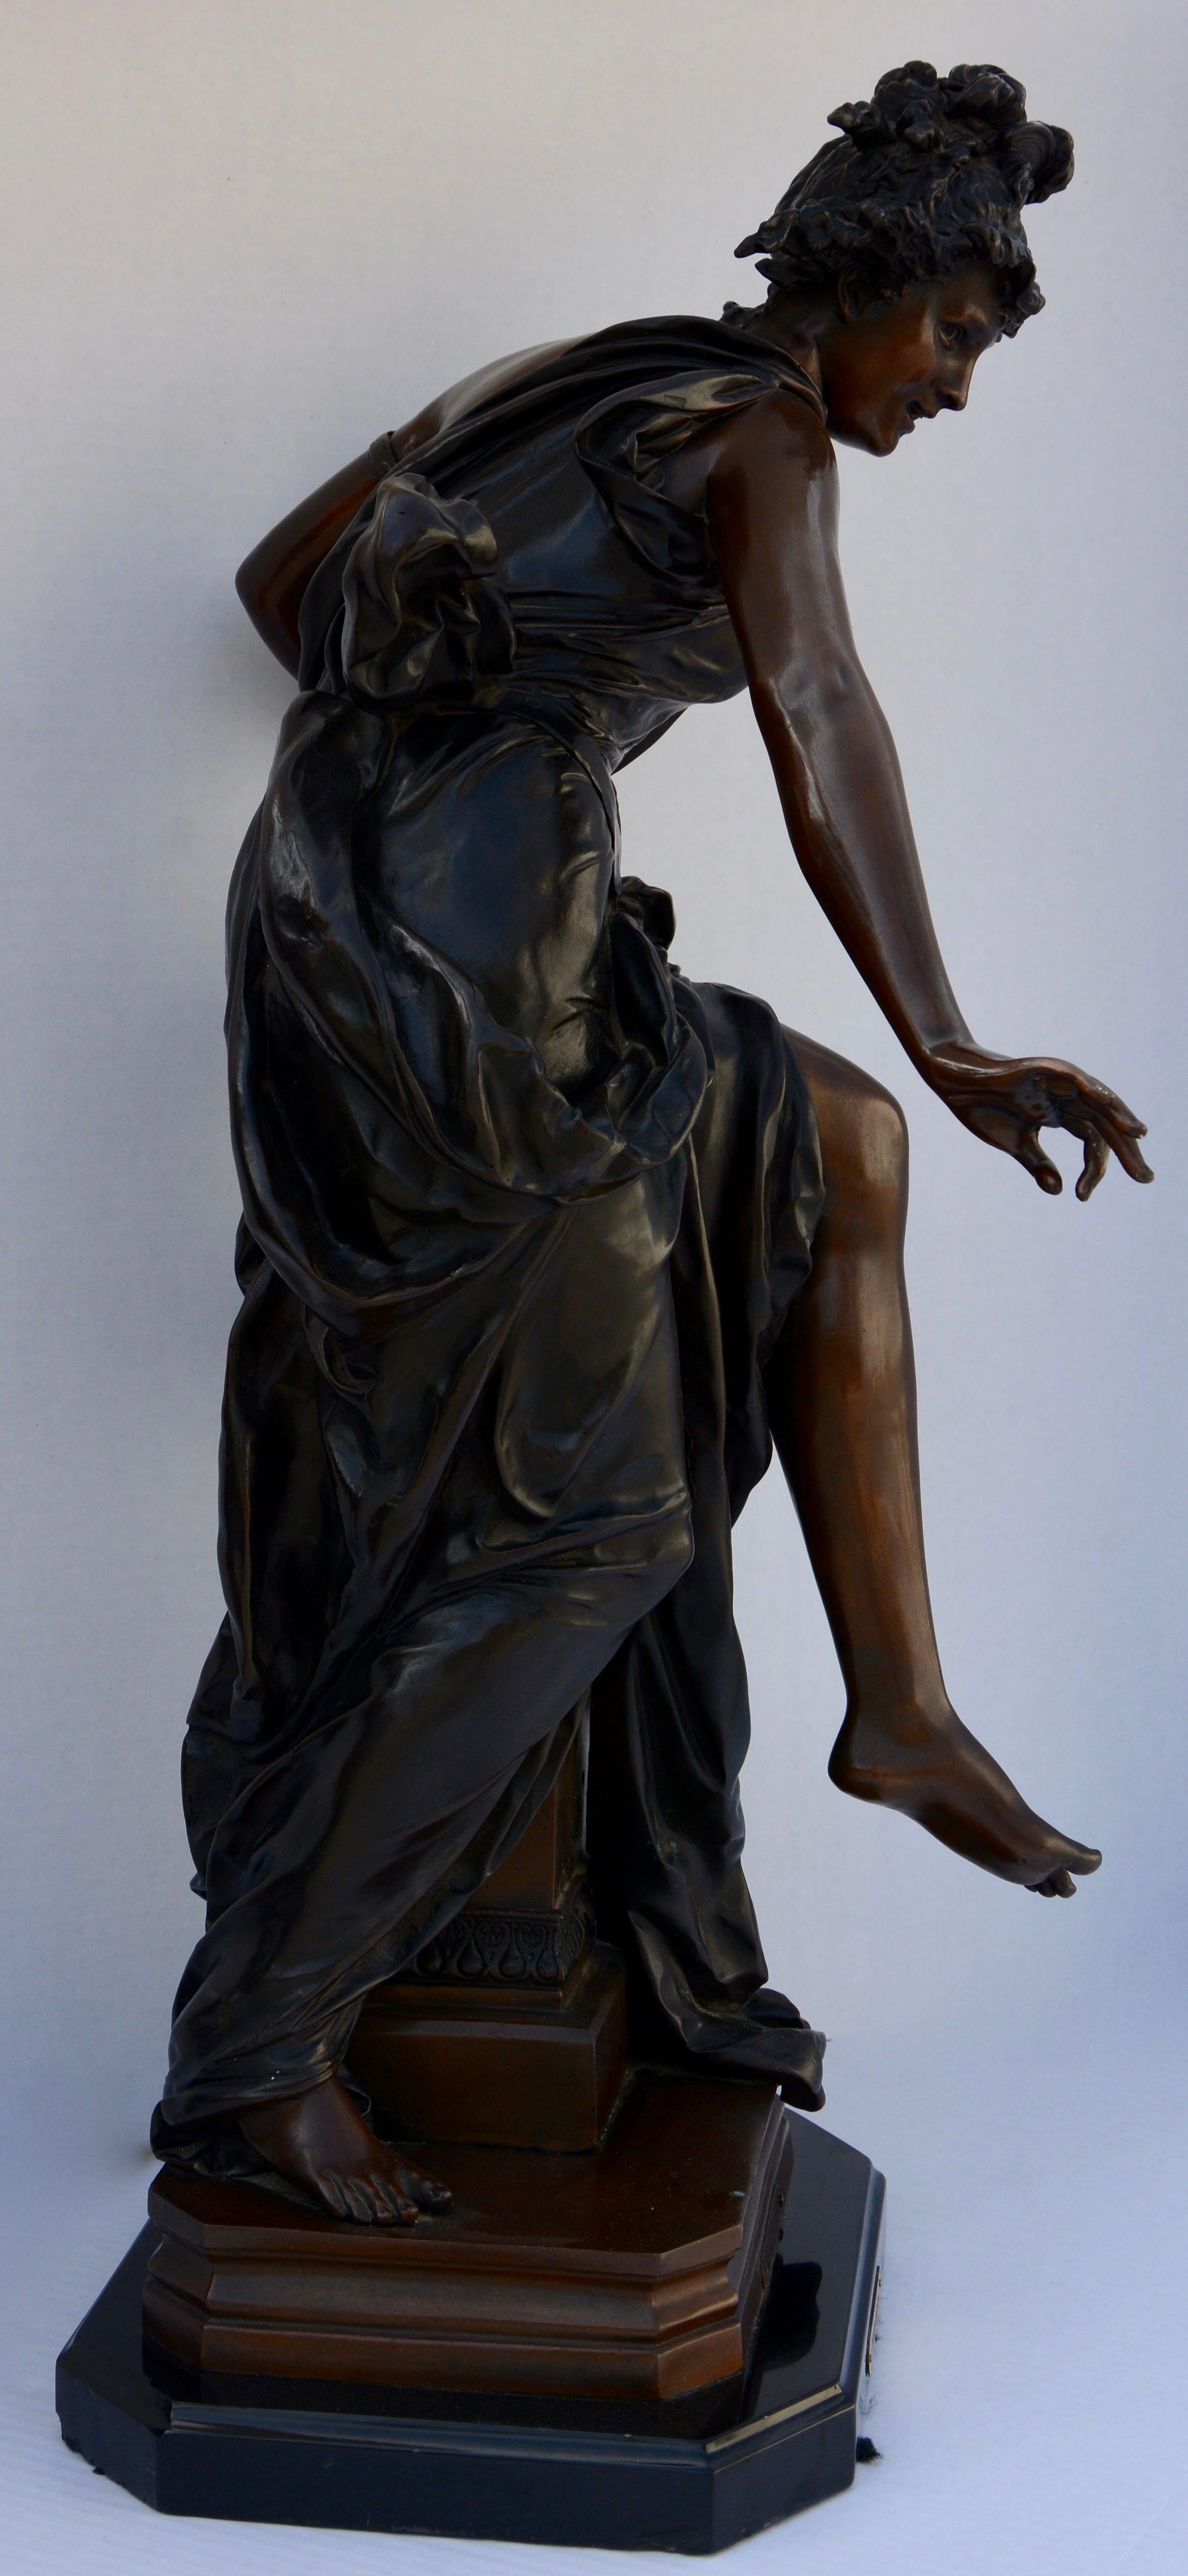 This is a late 19th century Le Melodie bronze sculpture by Albert-Ernest Carrier-Belleuse. It features a lady with her harp and lovely attire. The piece is marked.